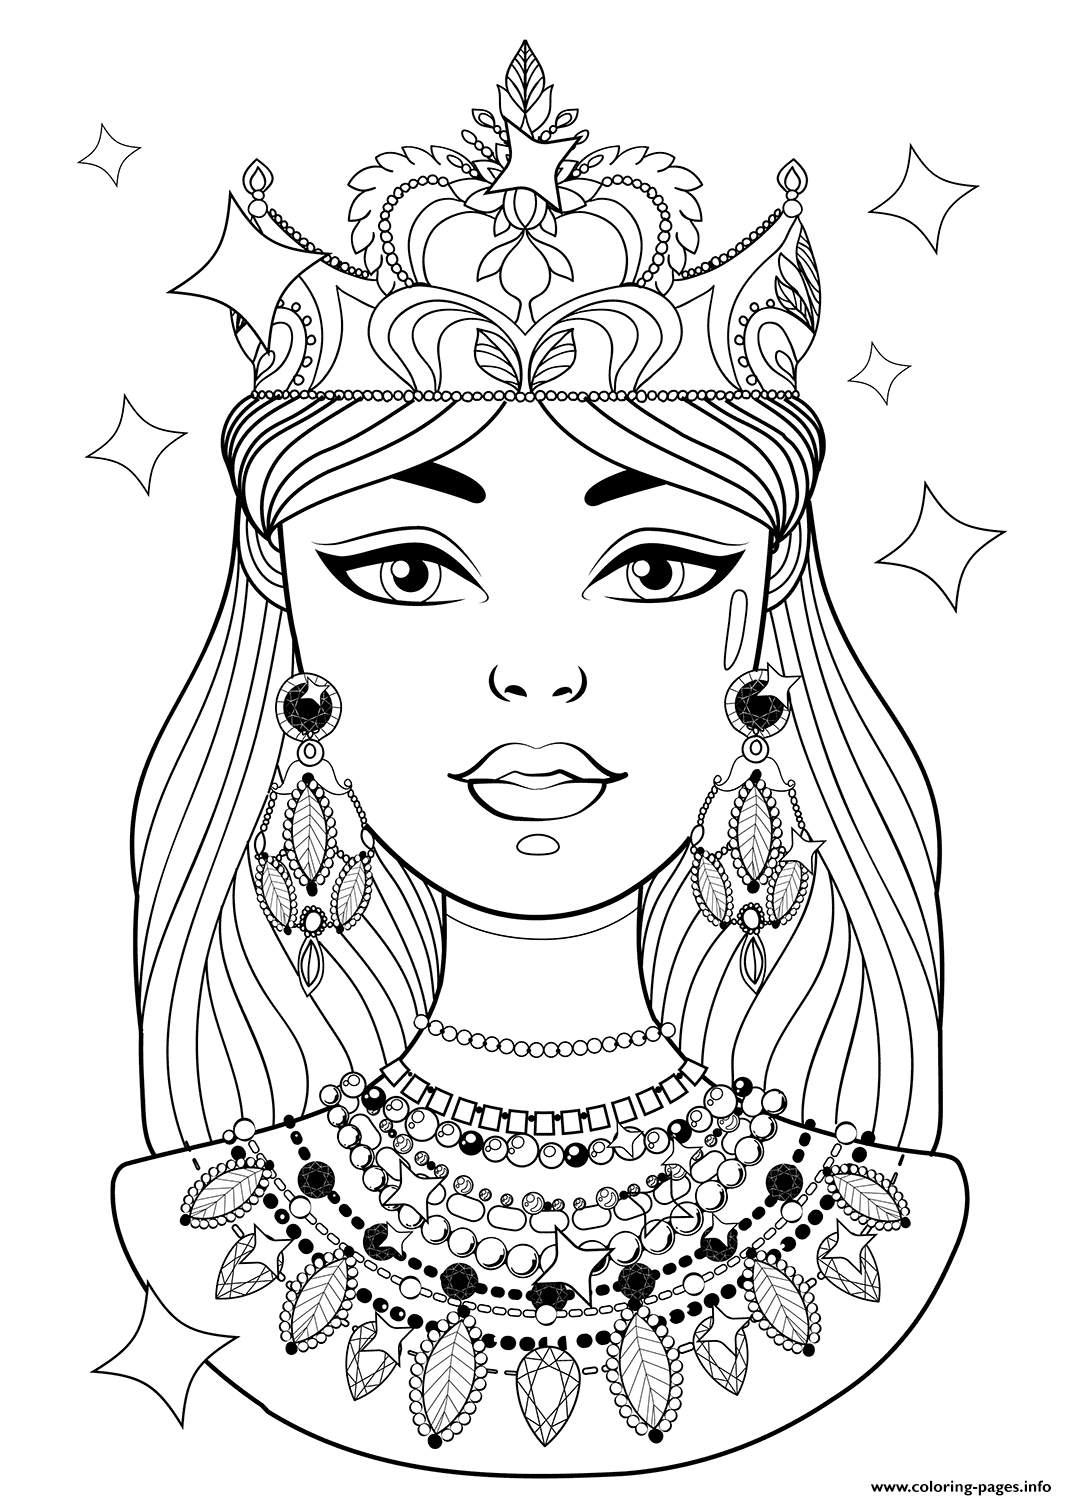 shining-princess-with-necklaces-coloring-page-printable